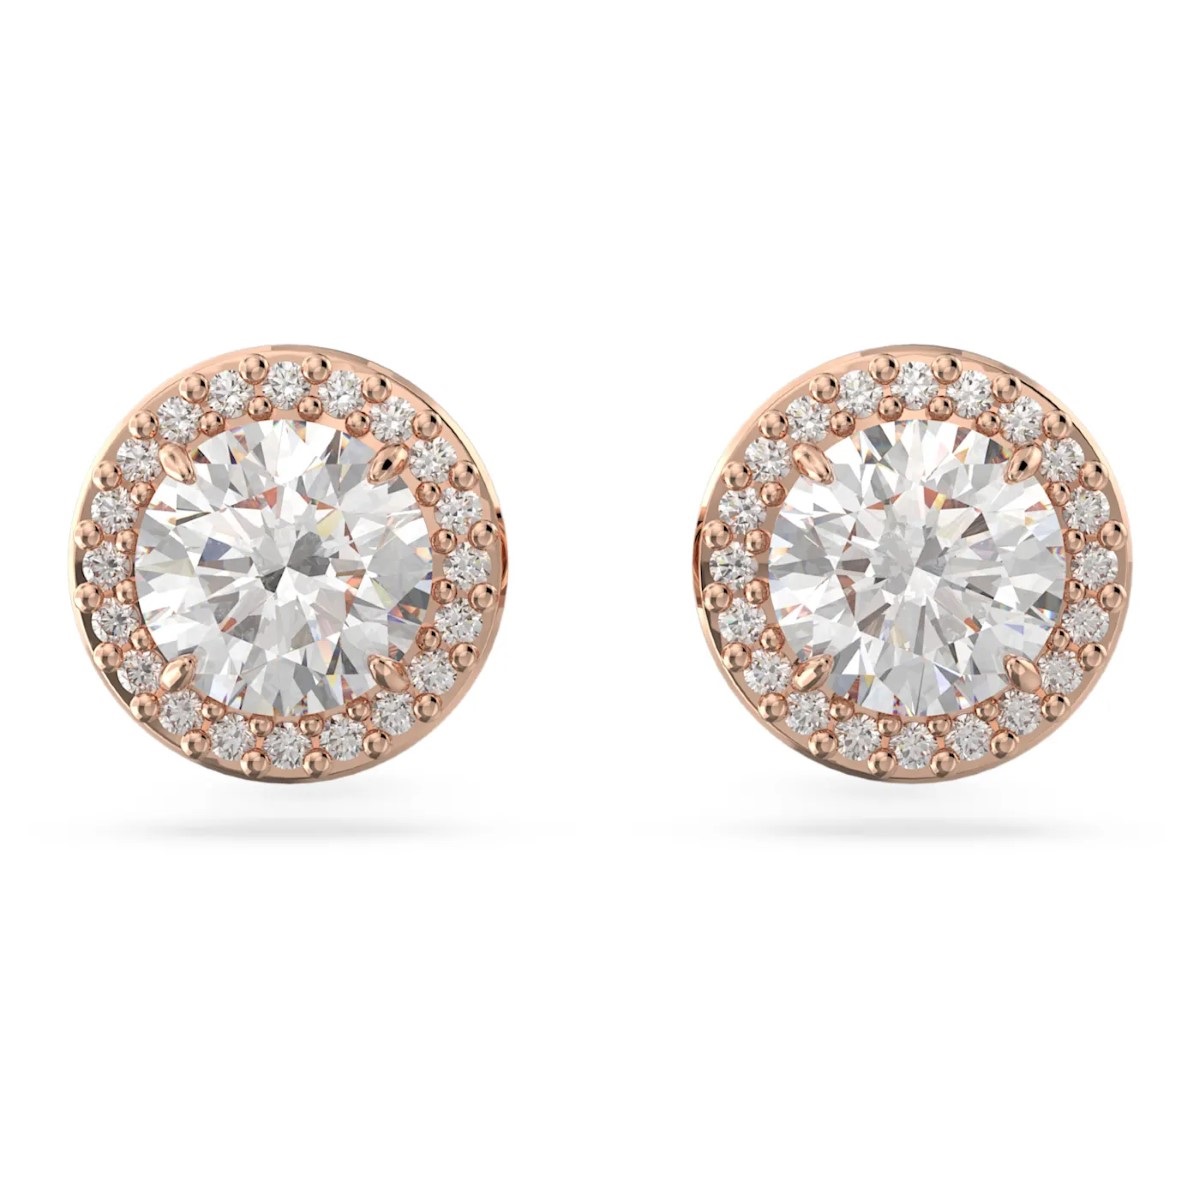 Swarovski Constella Halo Stud Earrings - White with Rose Gold Plating